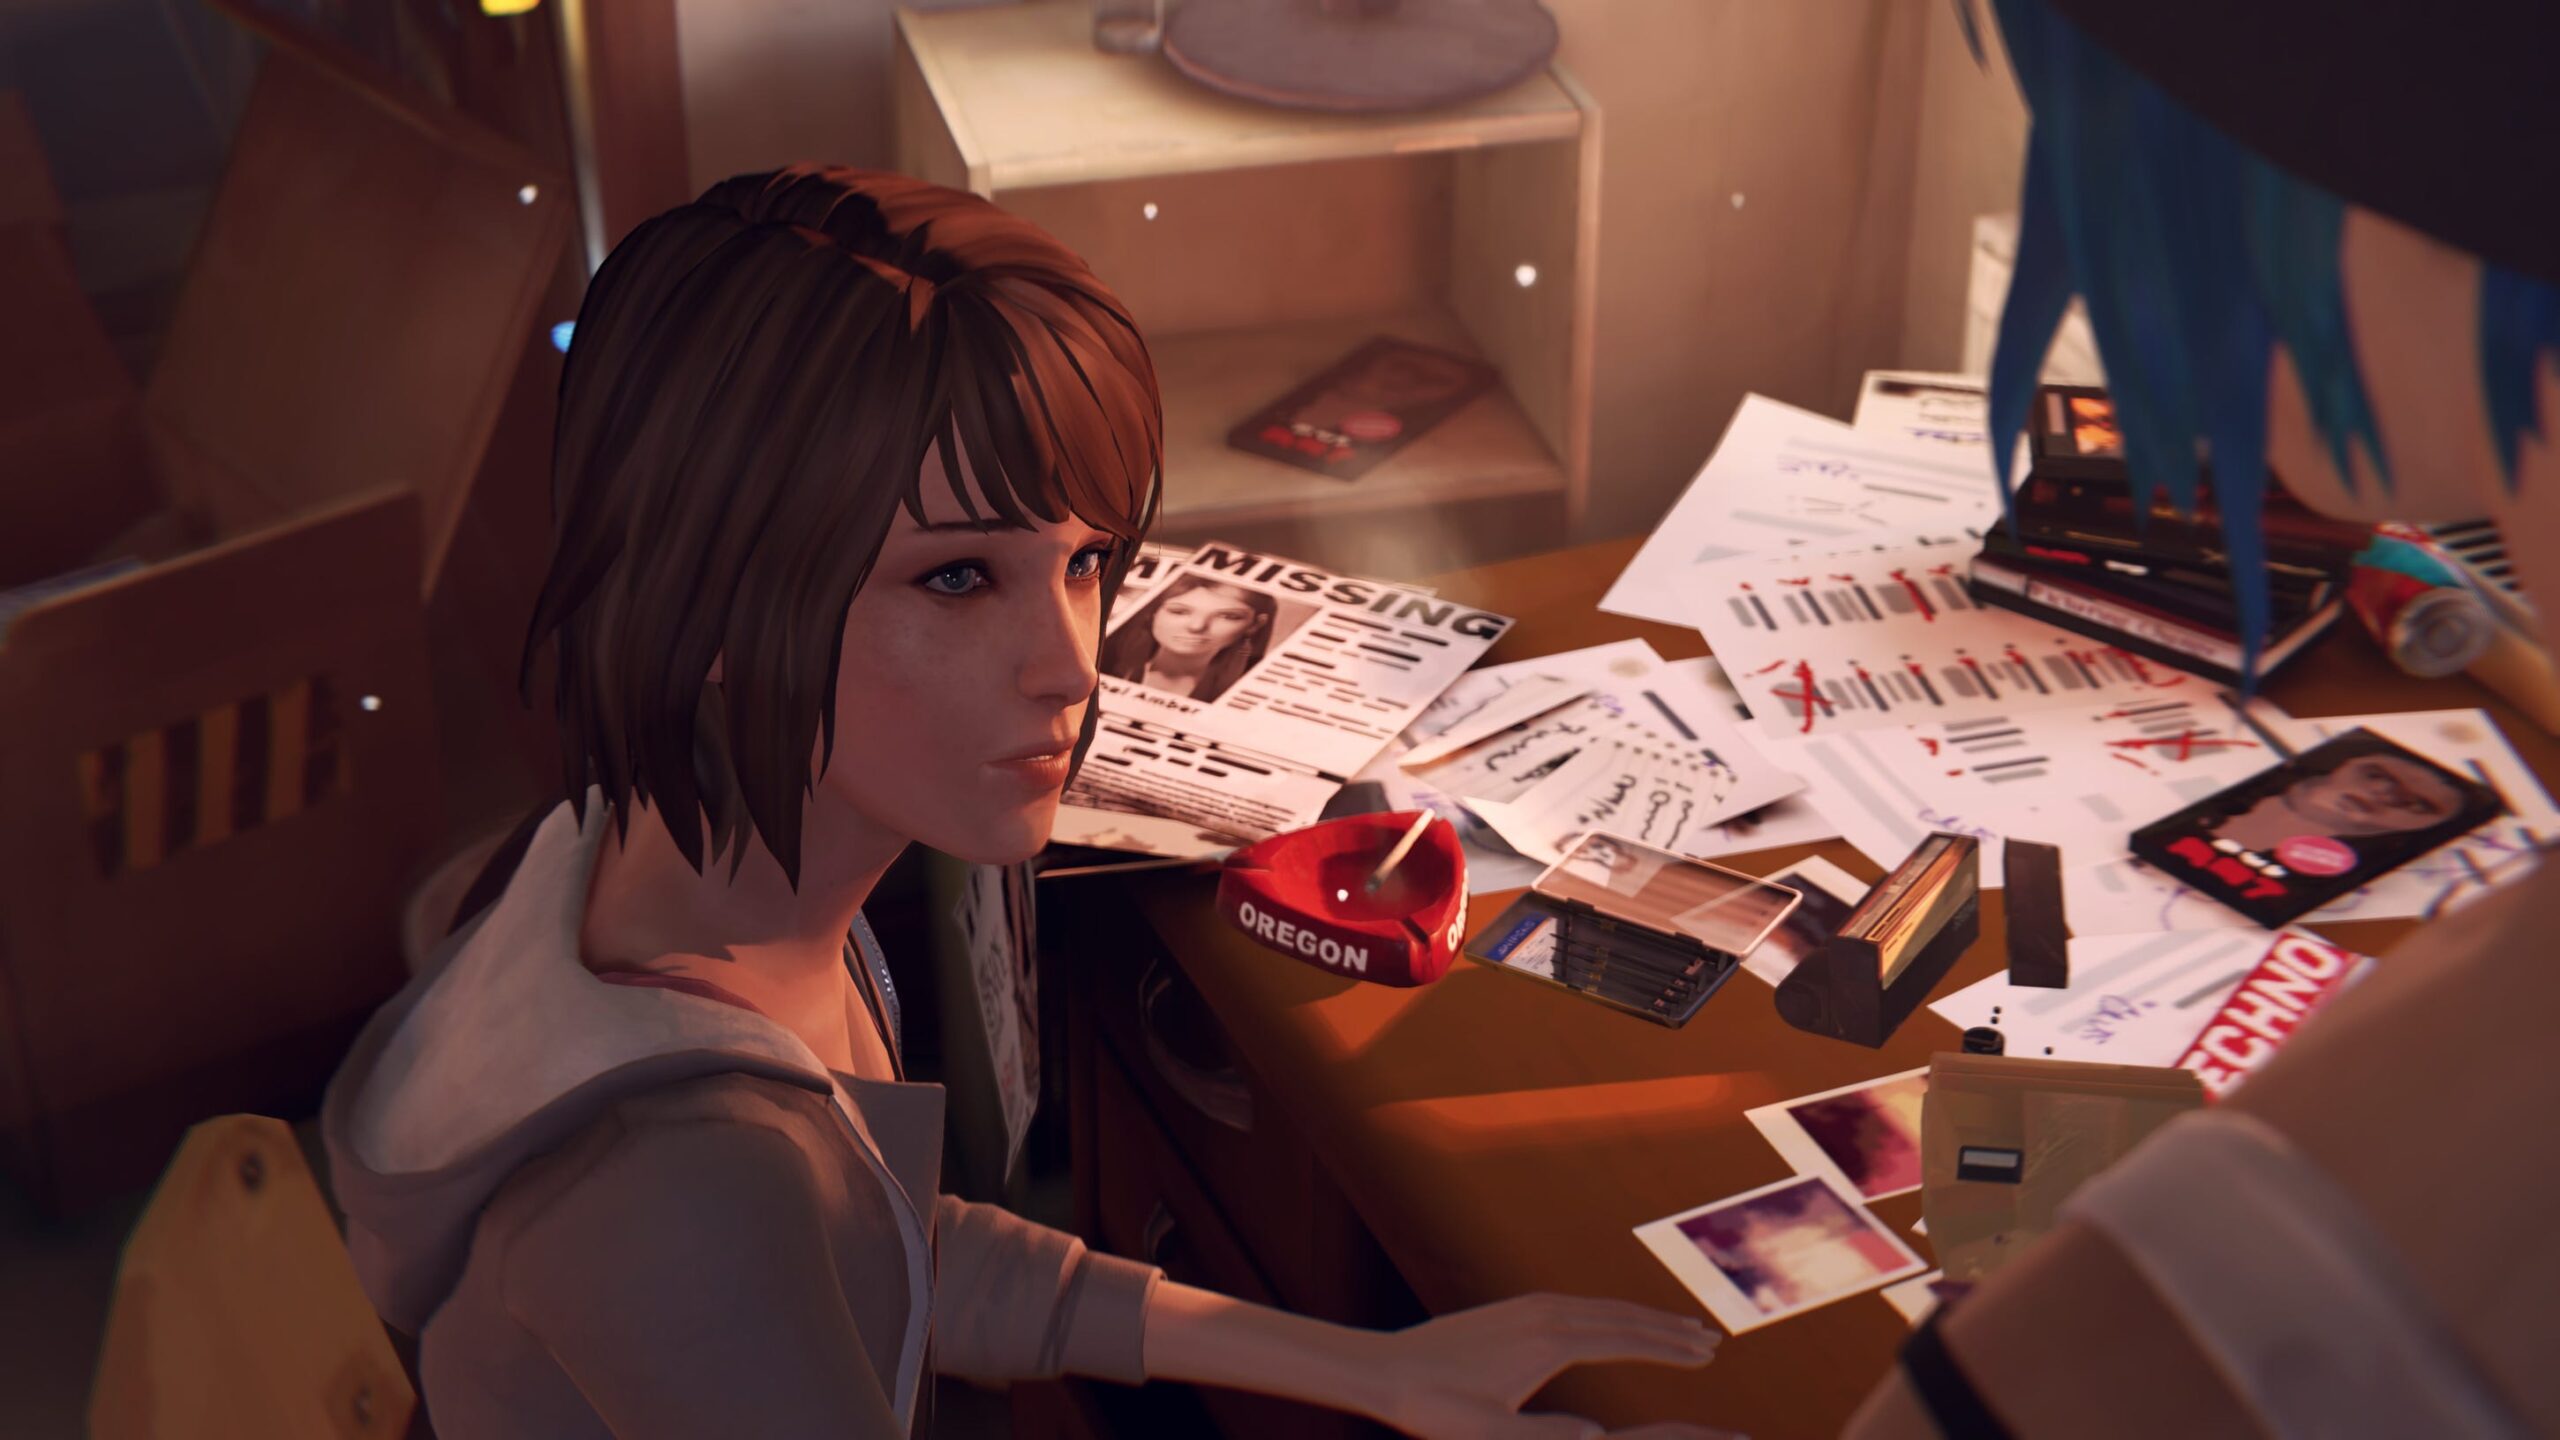 Square Enix: Life is Strange—a Game So Good, Creators Can't Put It Down -  BENlabs